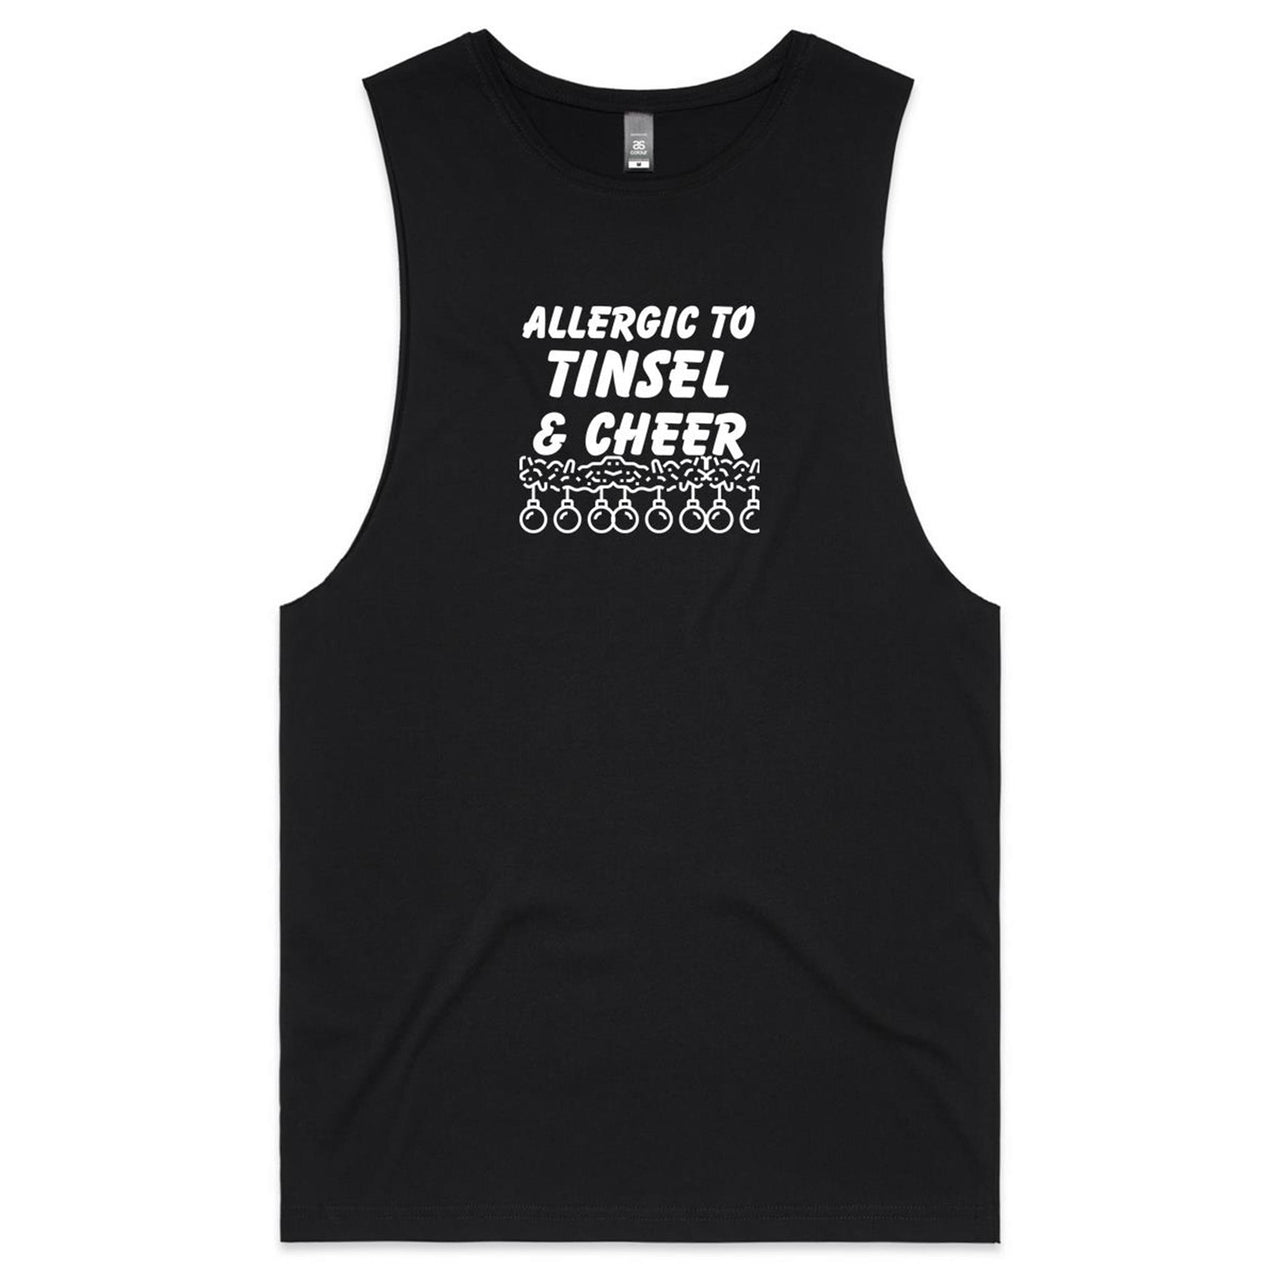 CBF Allergic to Tinsel and Cheer Christmas Tank Top Tee Black